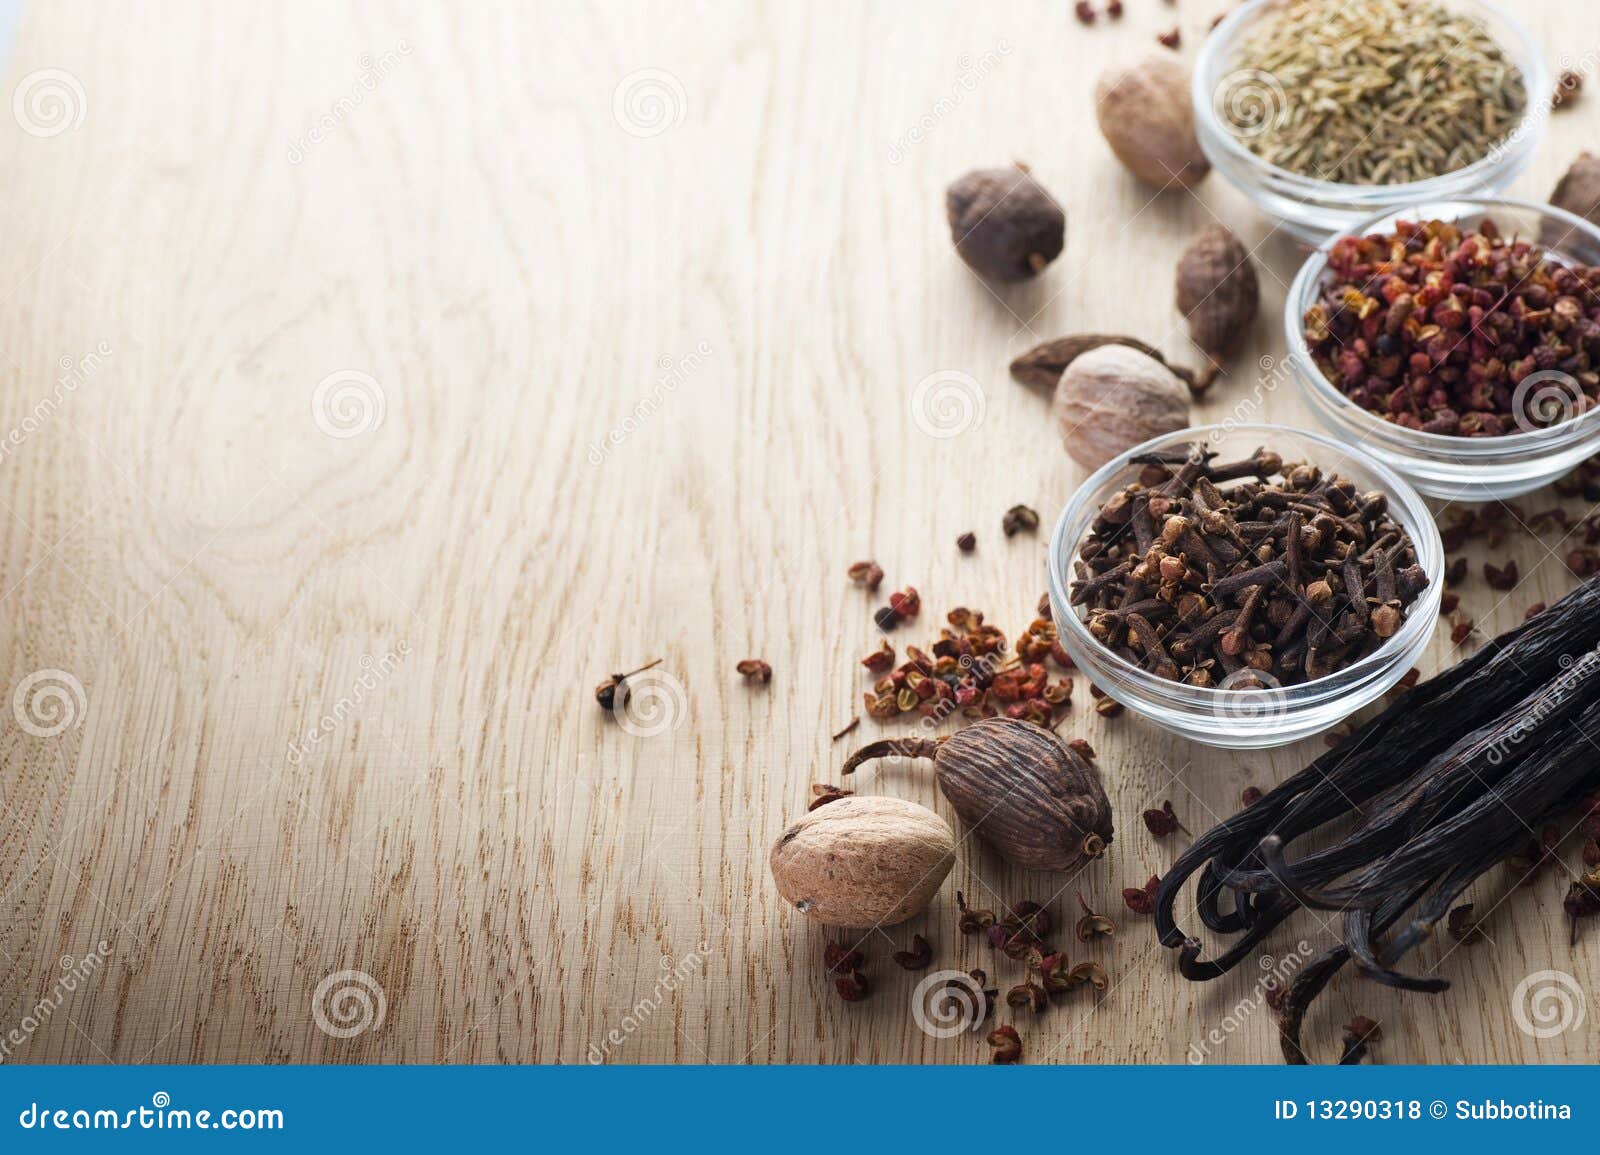 Spice stock photo. Image of grains, focus, cloves, aroma - 13290318